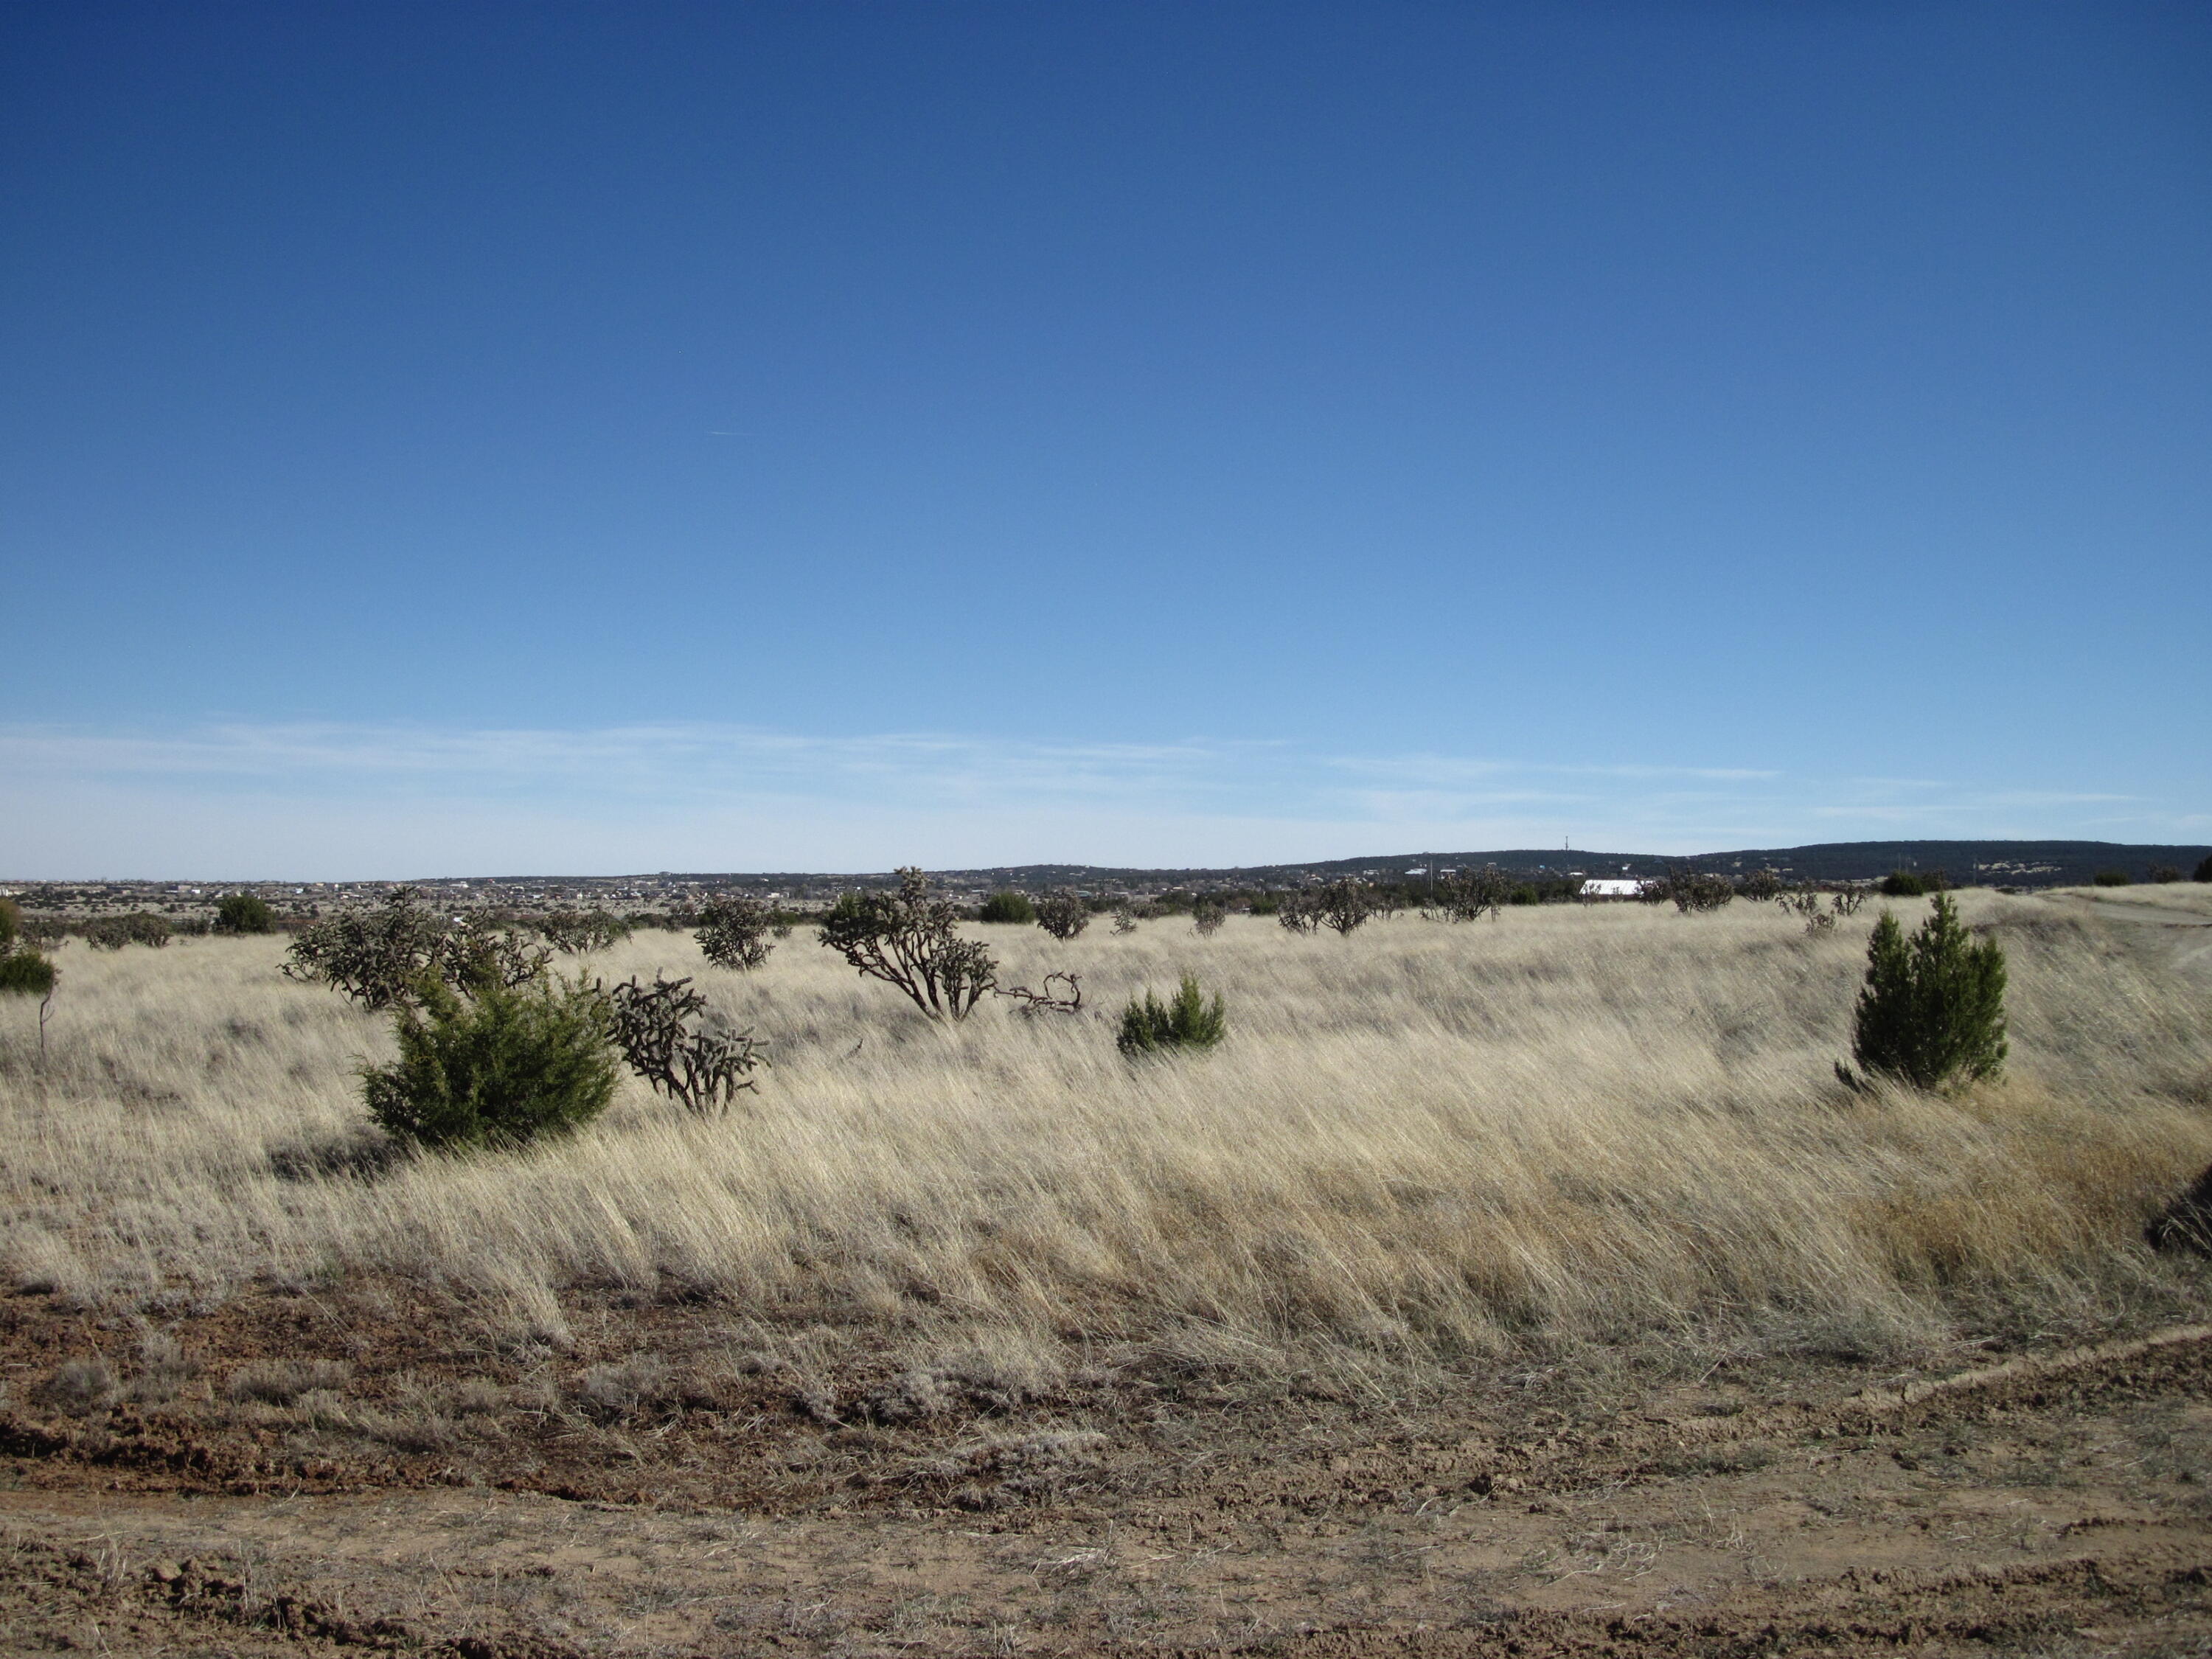 48 Cloonagh Road, Edgewood, New Mexico 87015, ,Land,For Sale,48 Cloonagh Road,1032282